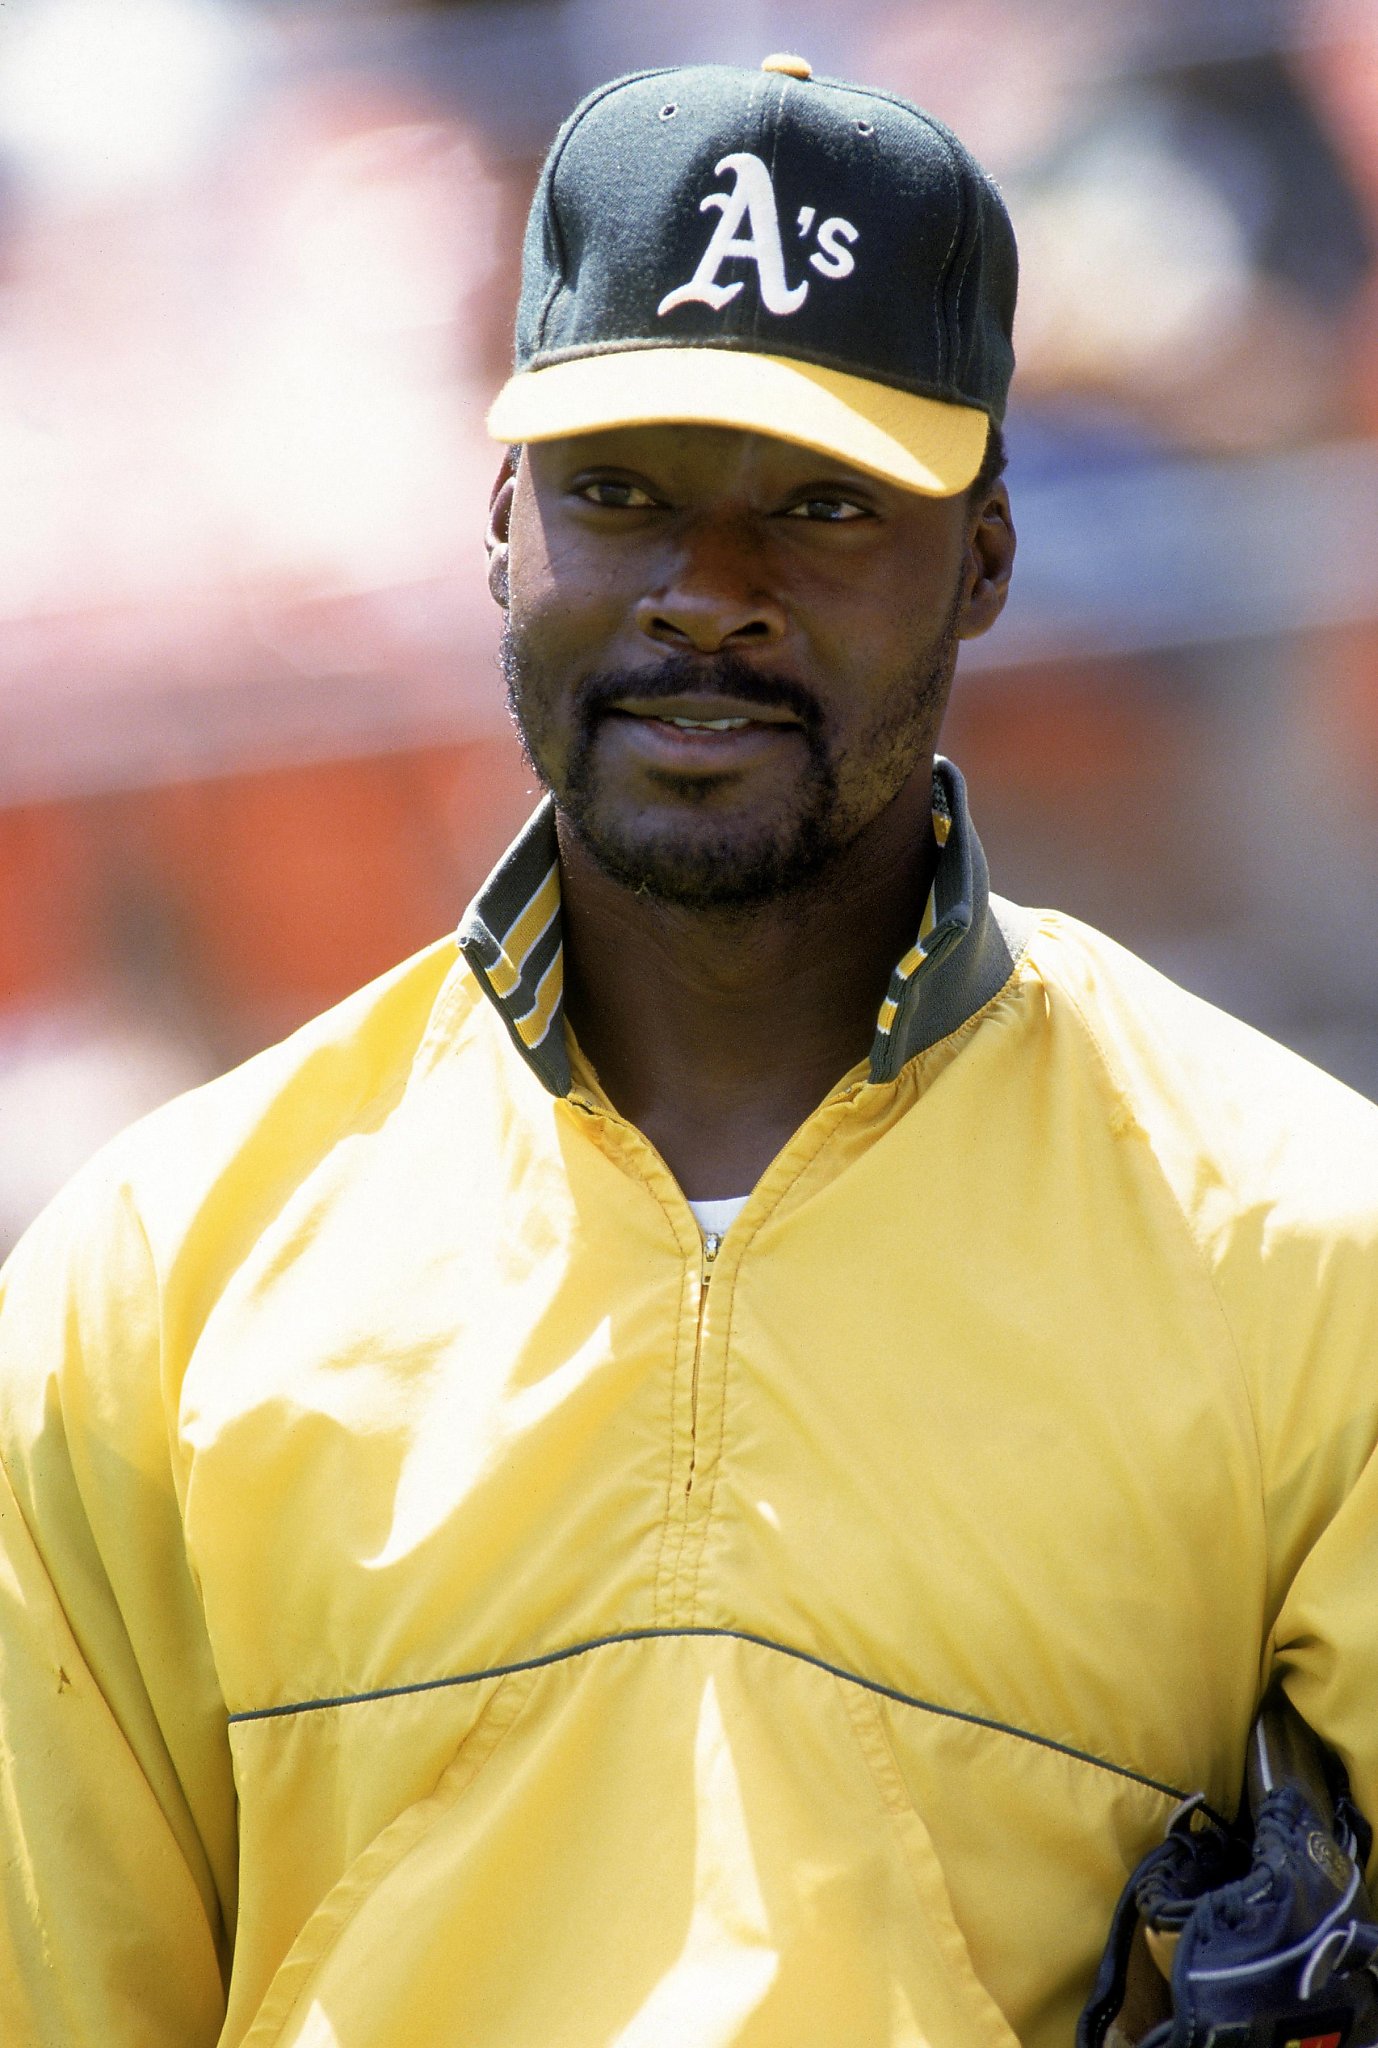 Dave Stewart rejoins A's as spring training instructor